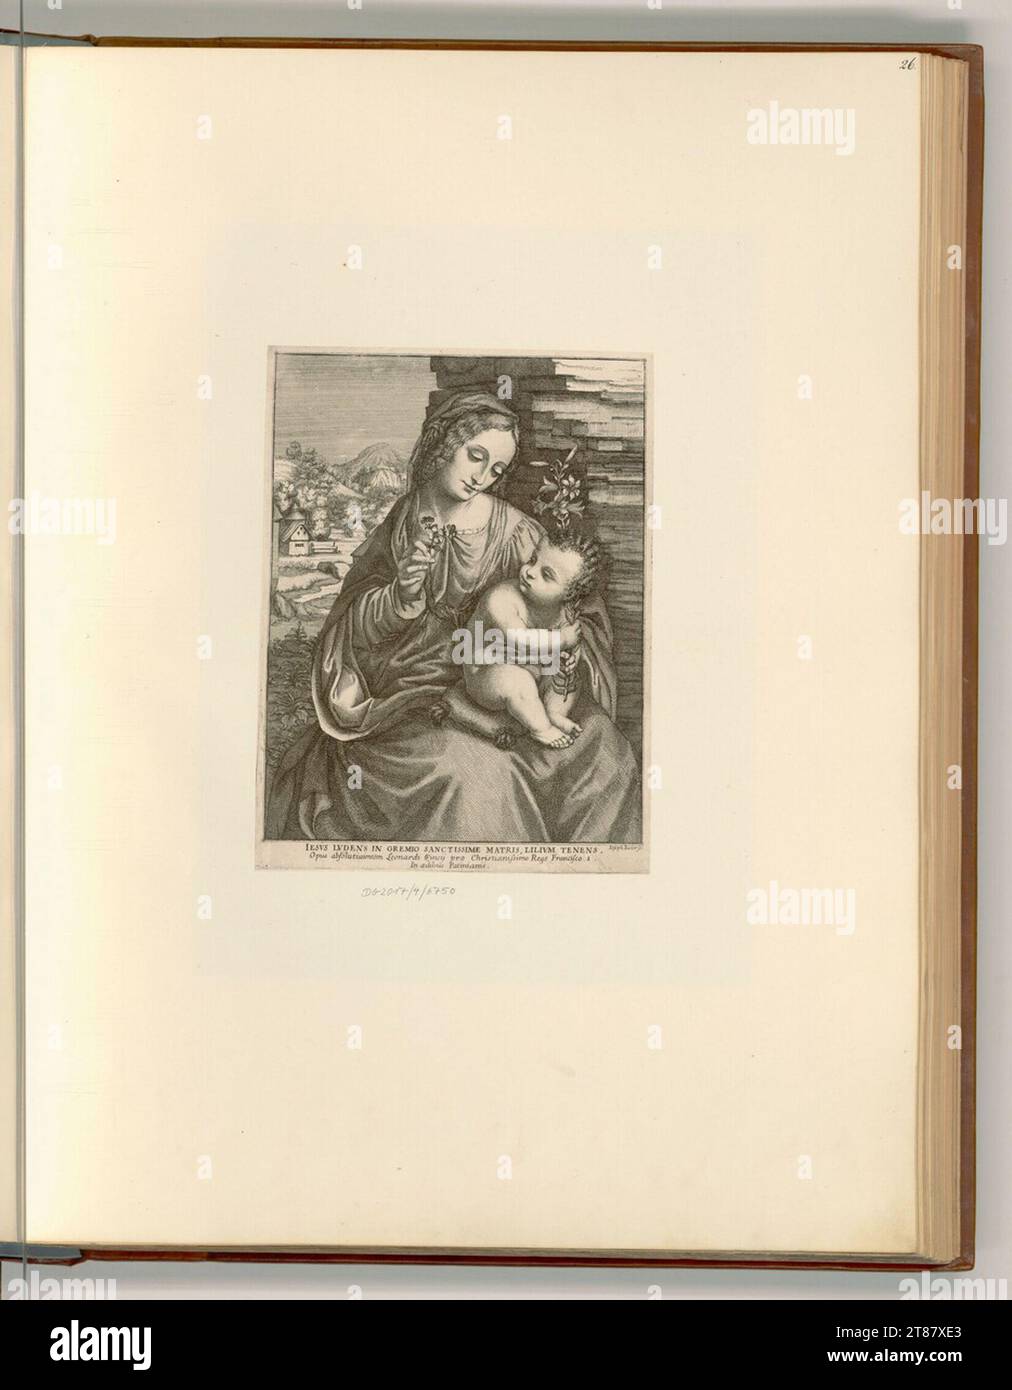 unbestimmt (Engraver) Madonna with child and lily. Copper engraving print 17. Century , 17th century Stock Photo